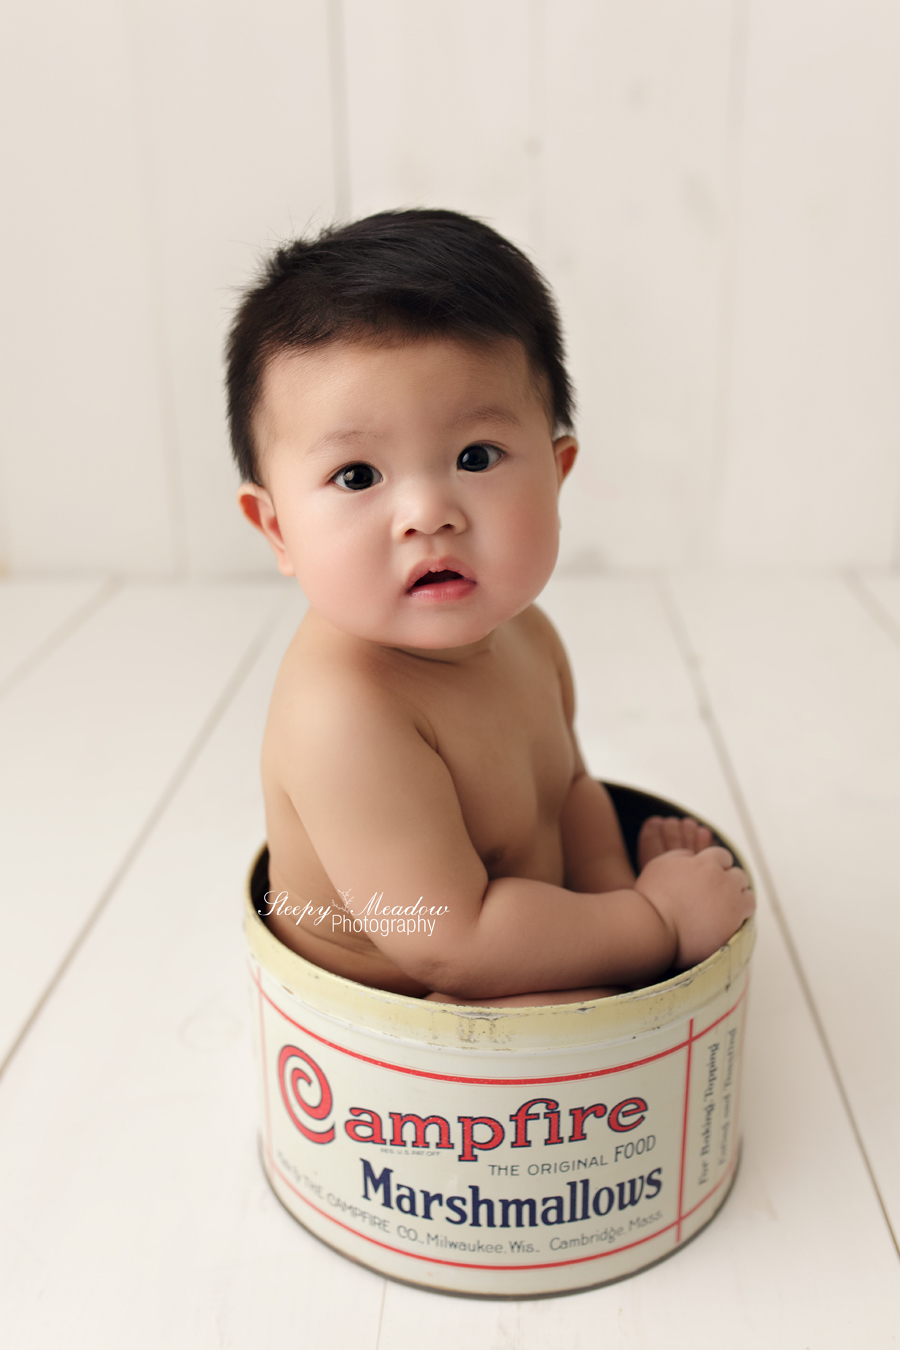 Sweet baby boy poses in vintage tin for his photo shoot in Waukesha.